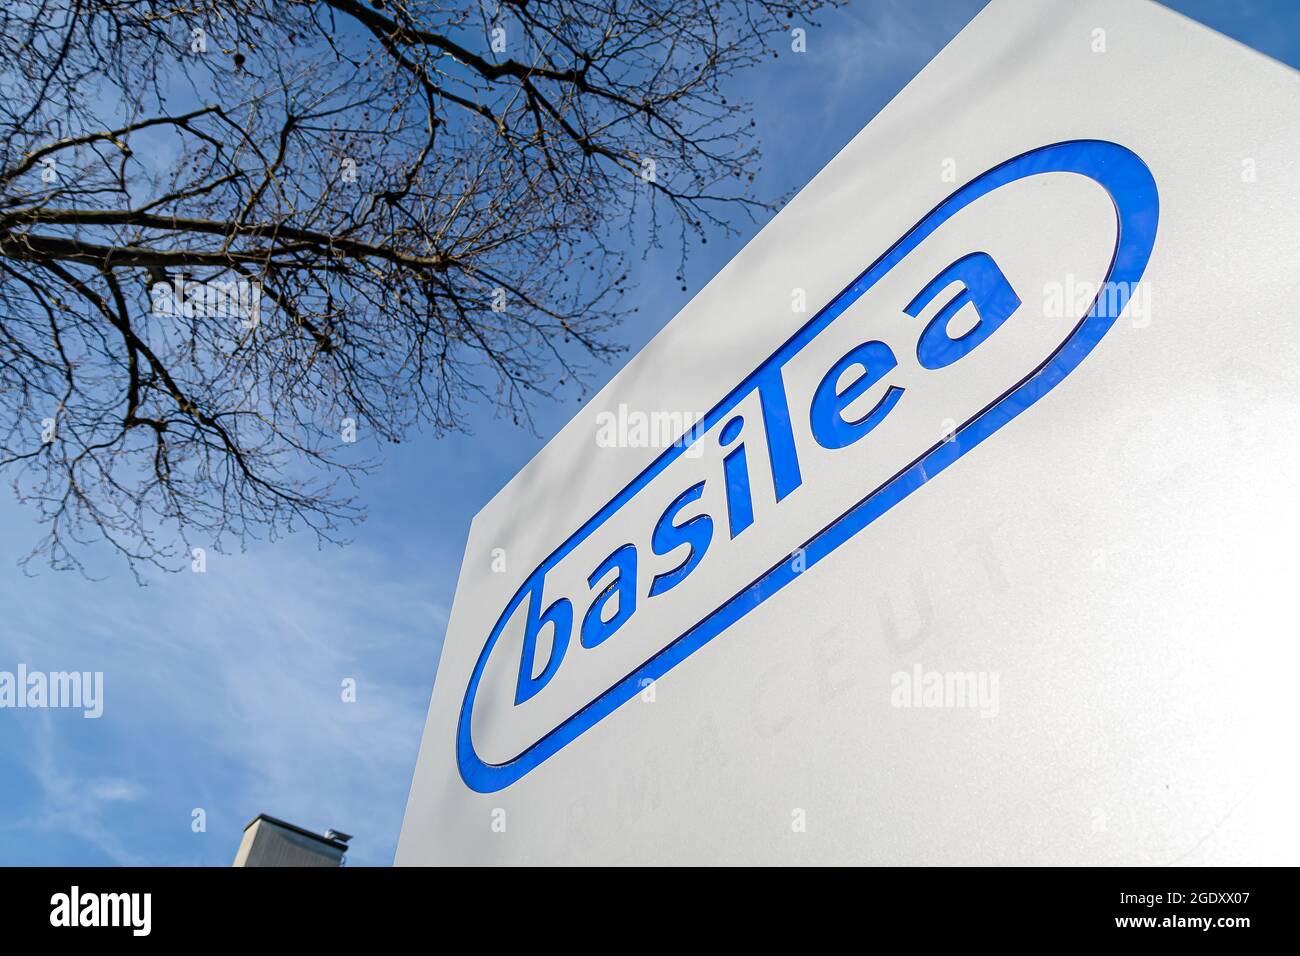 BASEL, SWITZERLAND - MARCH 15, 2020: Basilea Pharmaceutica is a multinational specialty biopharmaceutical company headquartered in Basel, Switzerland Stock Photo